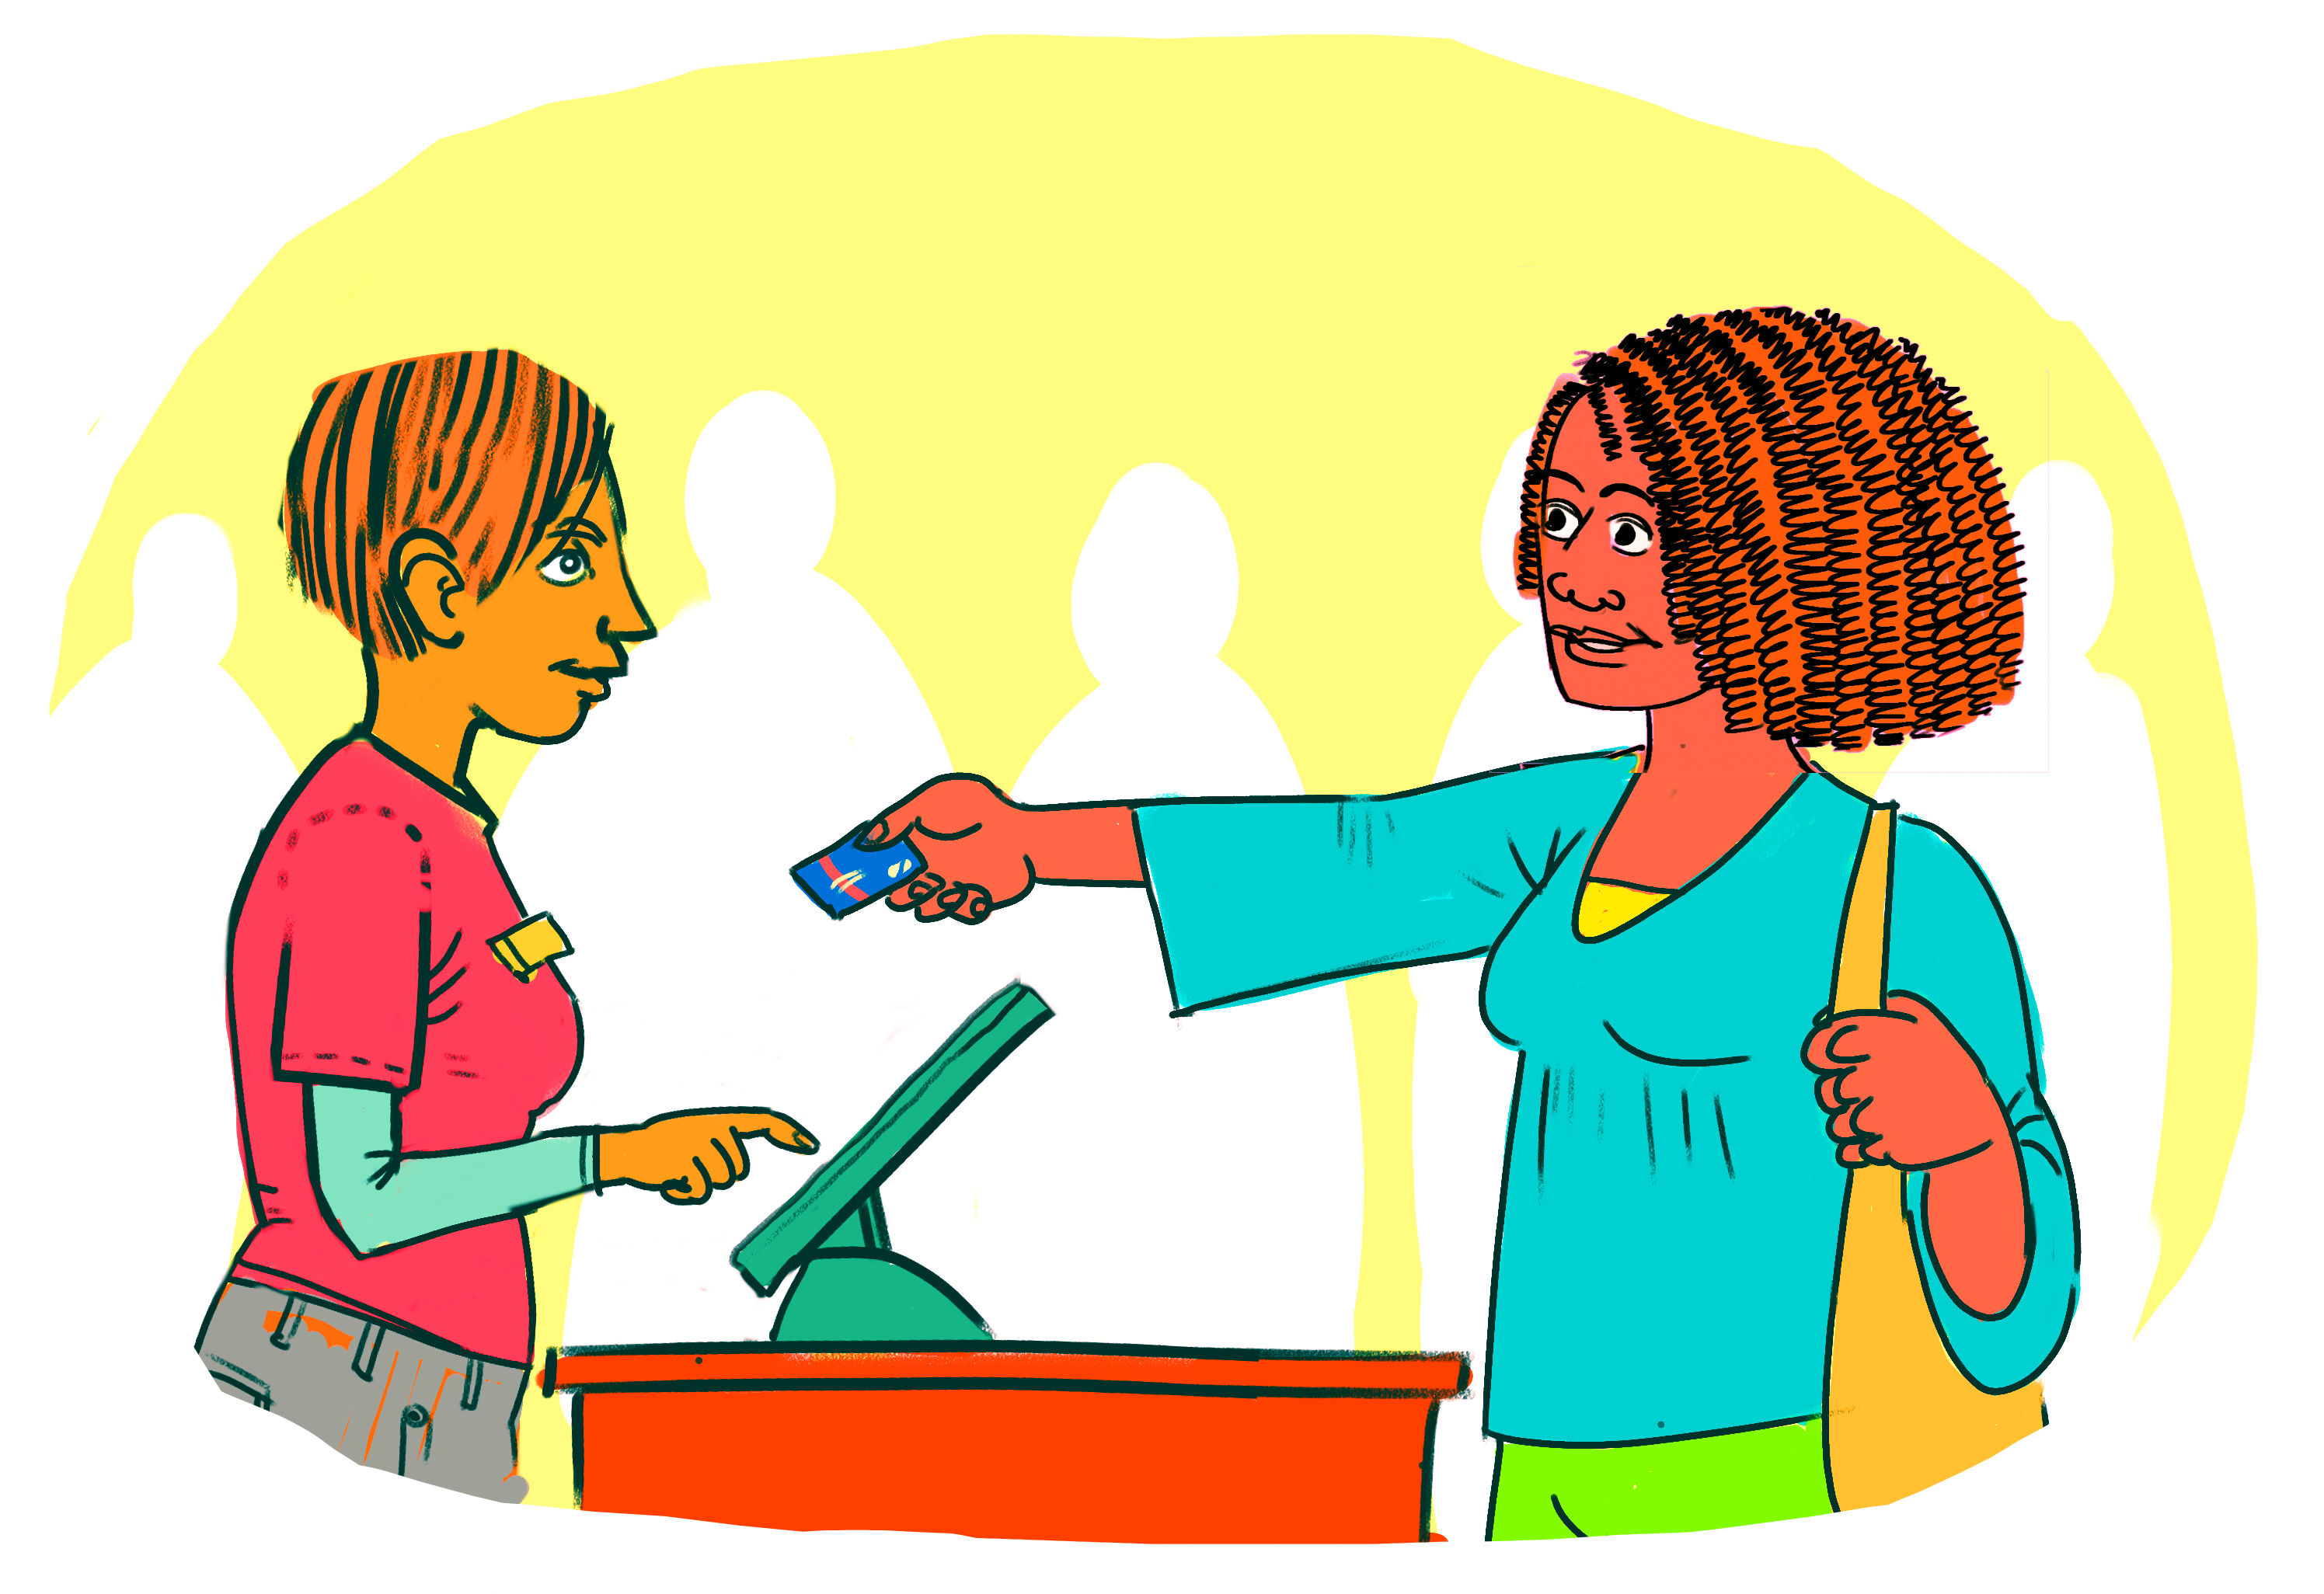 Teen clipart peer counseling. Collection of free furthering